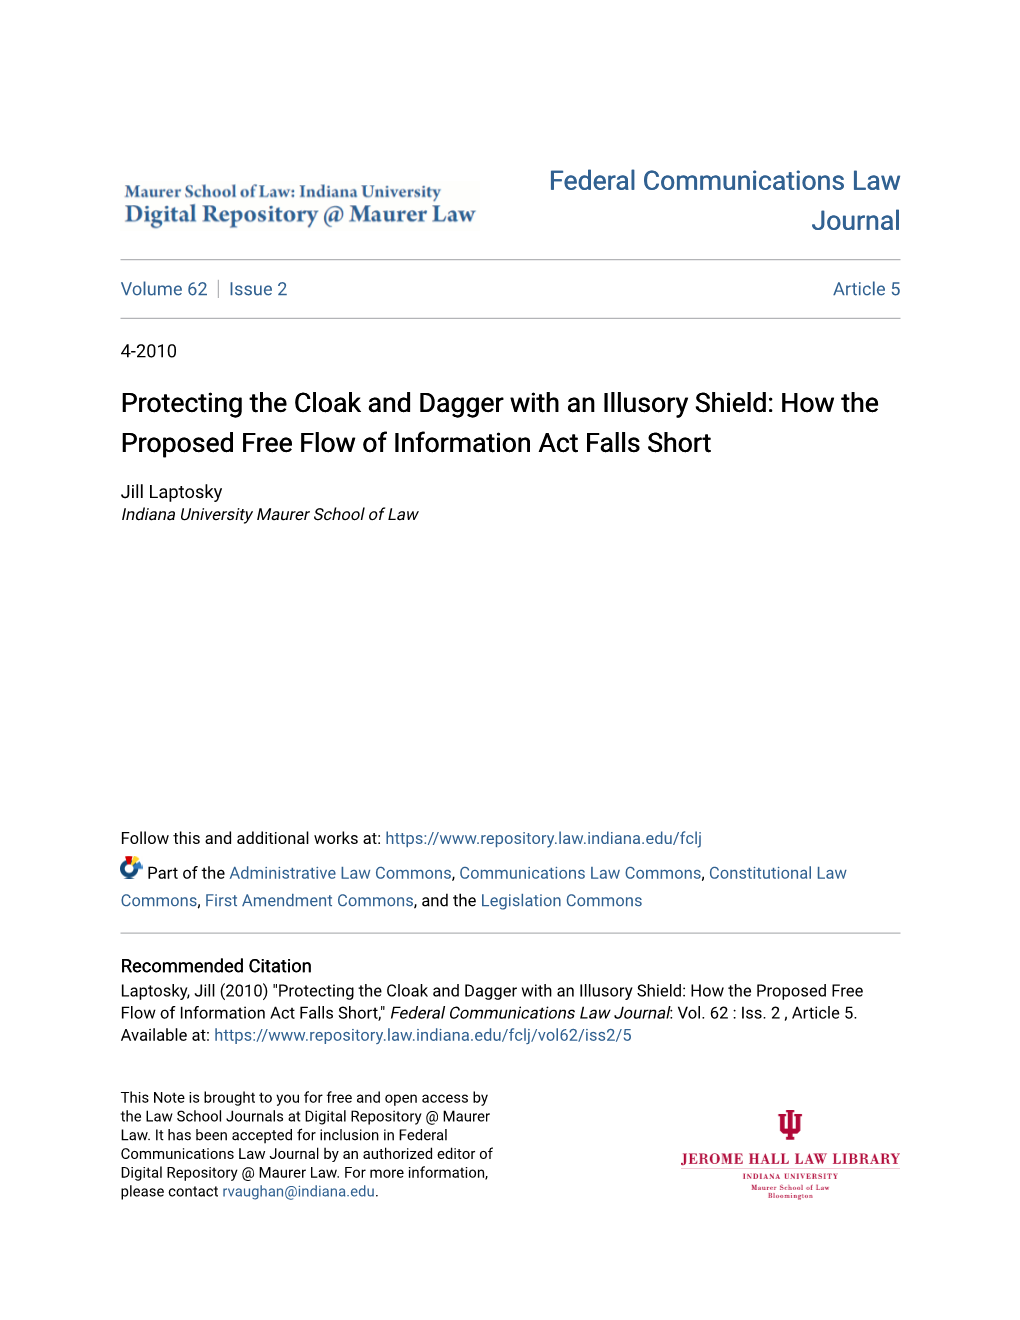 Protecting the Cloak and Dagger with an Illusory Shield: How the Proposed Free Flow of Information Act Falls Short